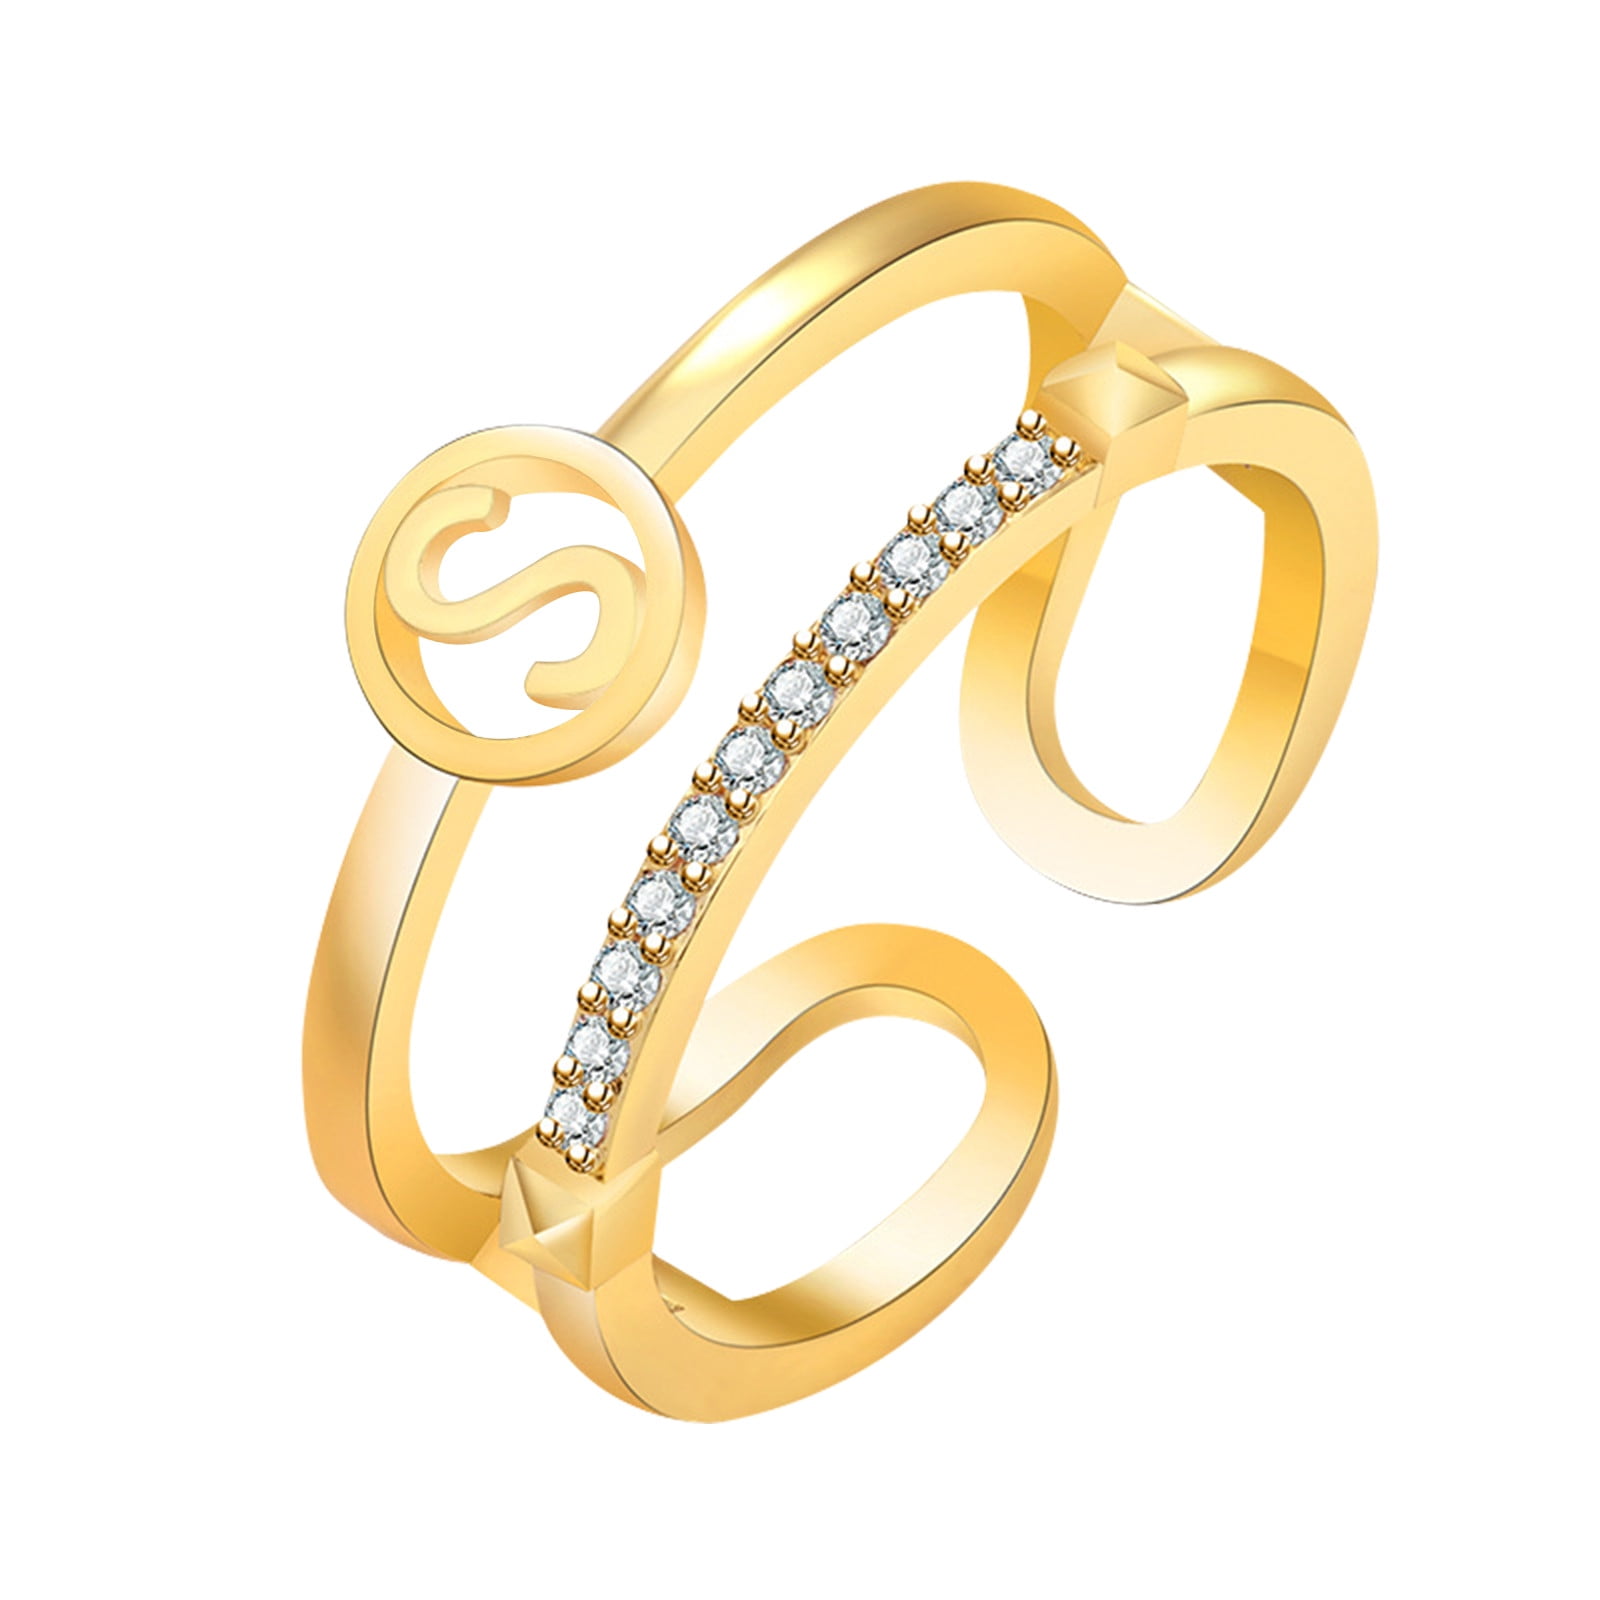 Yazi Initial Letter Ring for Women Girls Gold Stackable Alphabet Rings with  Initial Adjustable Crystal Inlaid Initial Rings Bridesmaid Gift -  Walmart.com